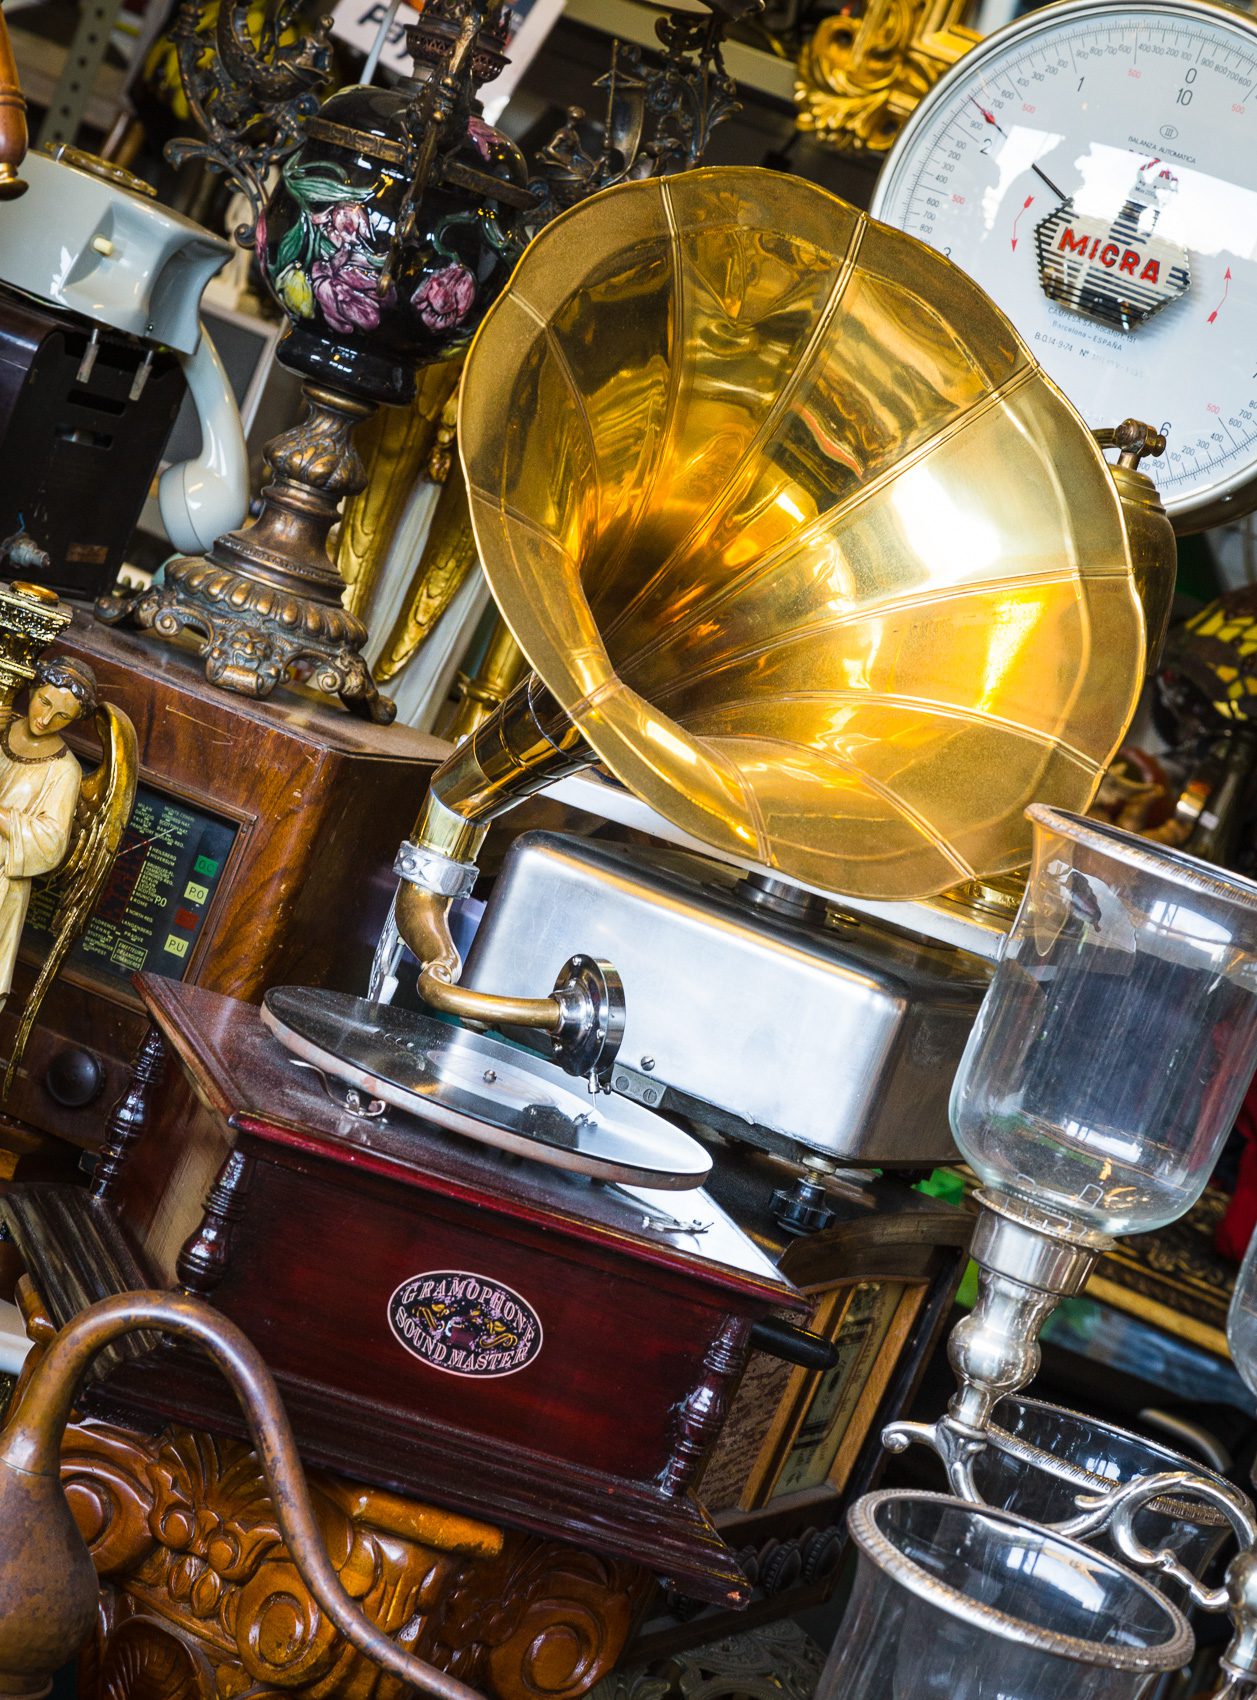 Old gramophone in an antique store at The Encants Vells, also known as the Mercat de Bellcaire, Barcelona, Spain. BC017